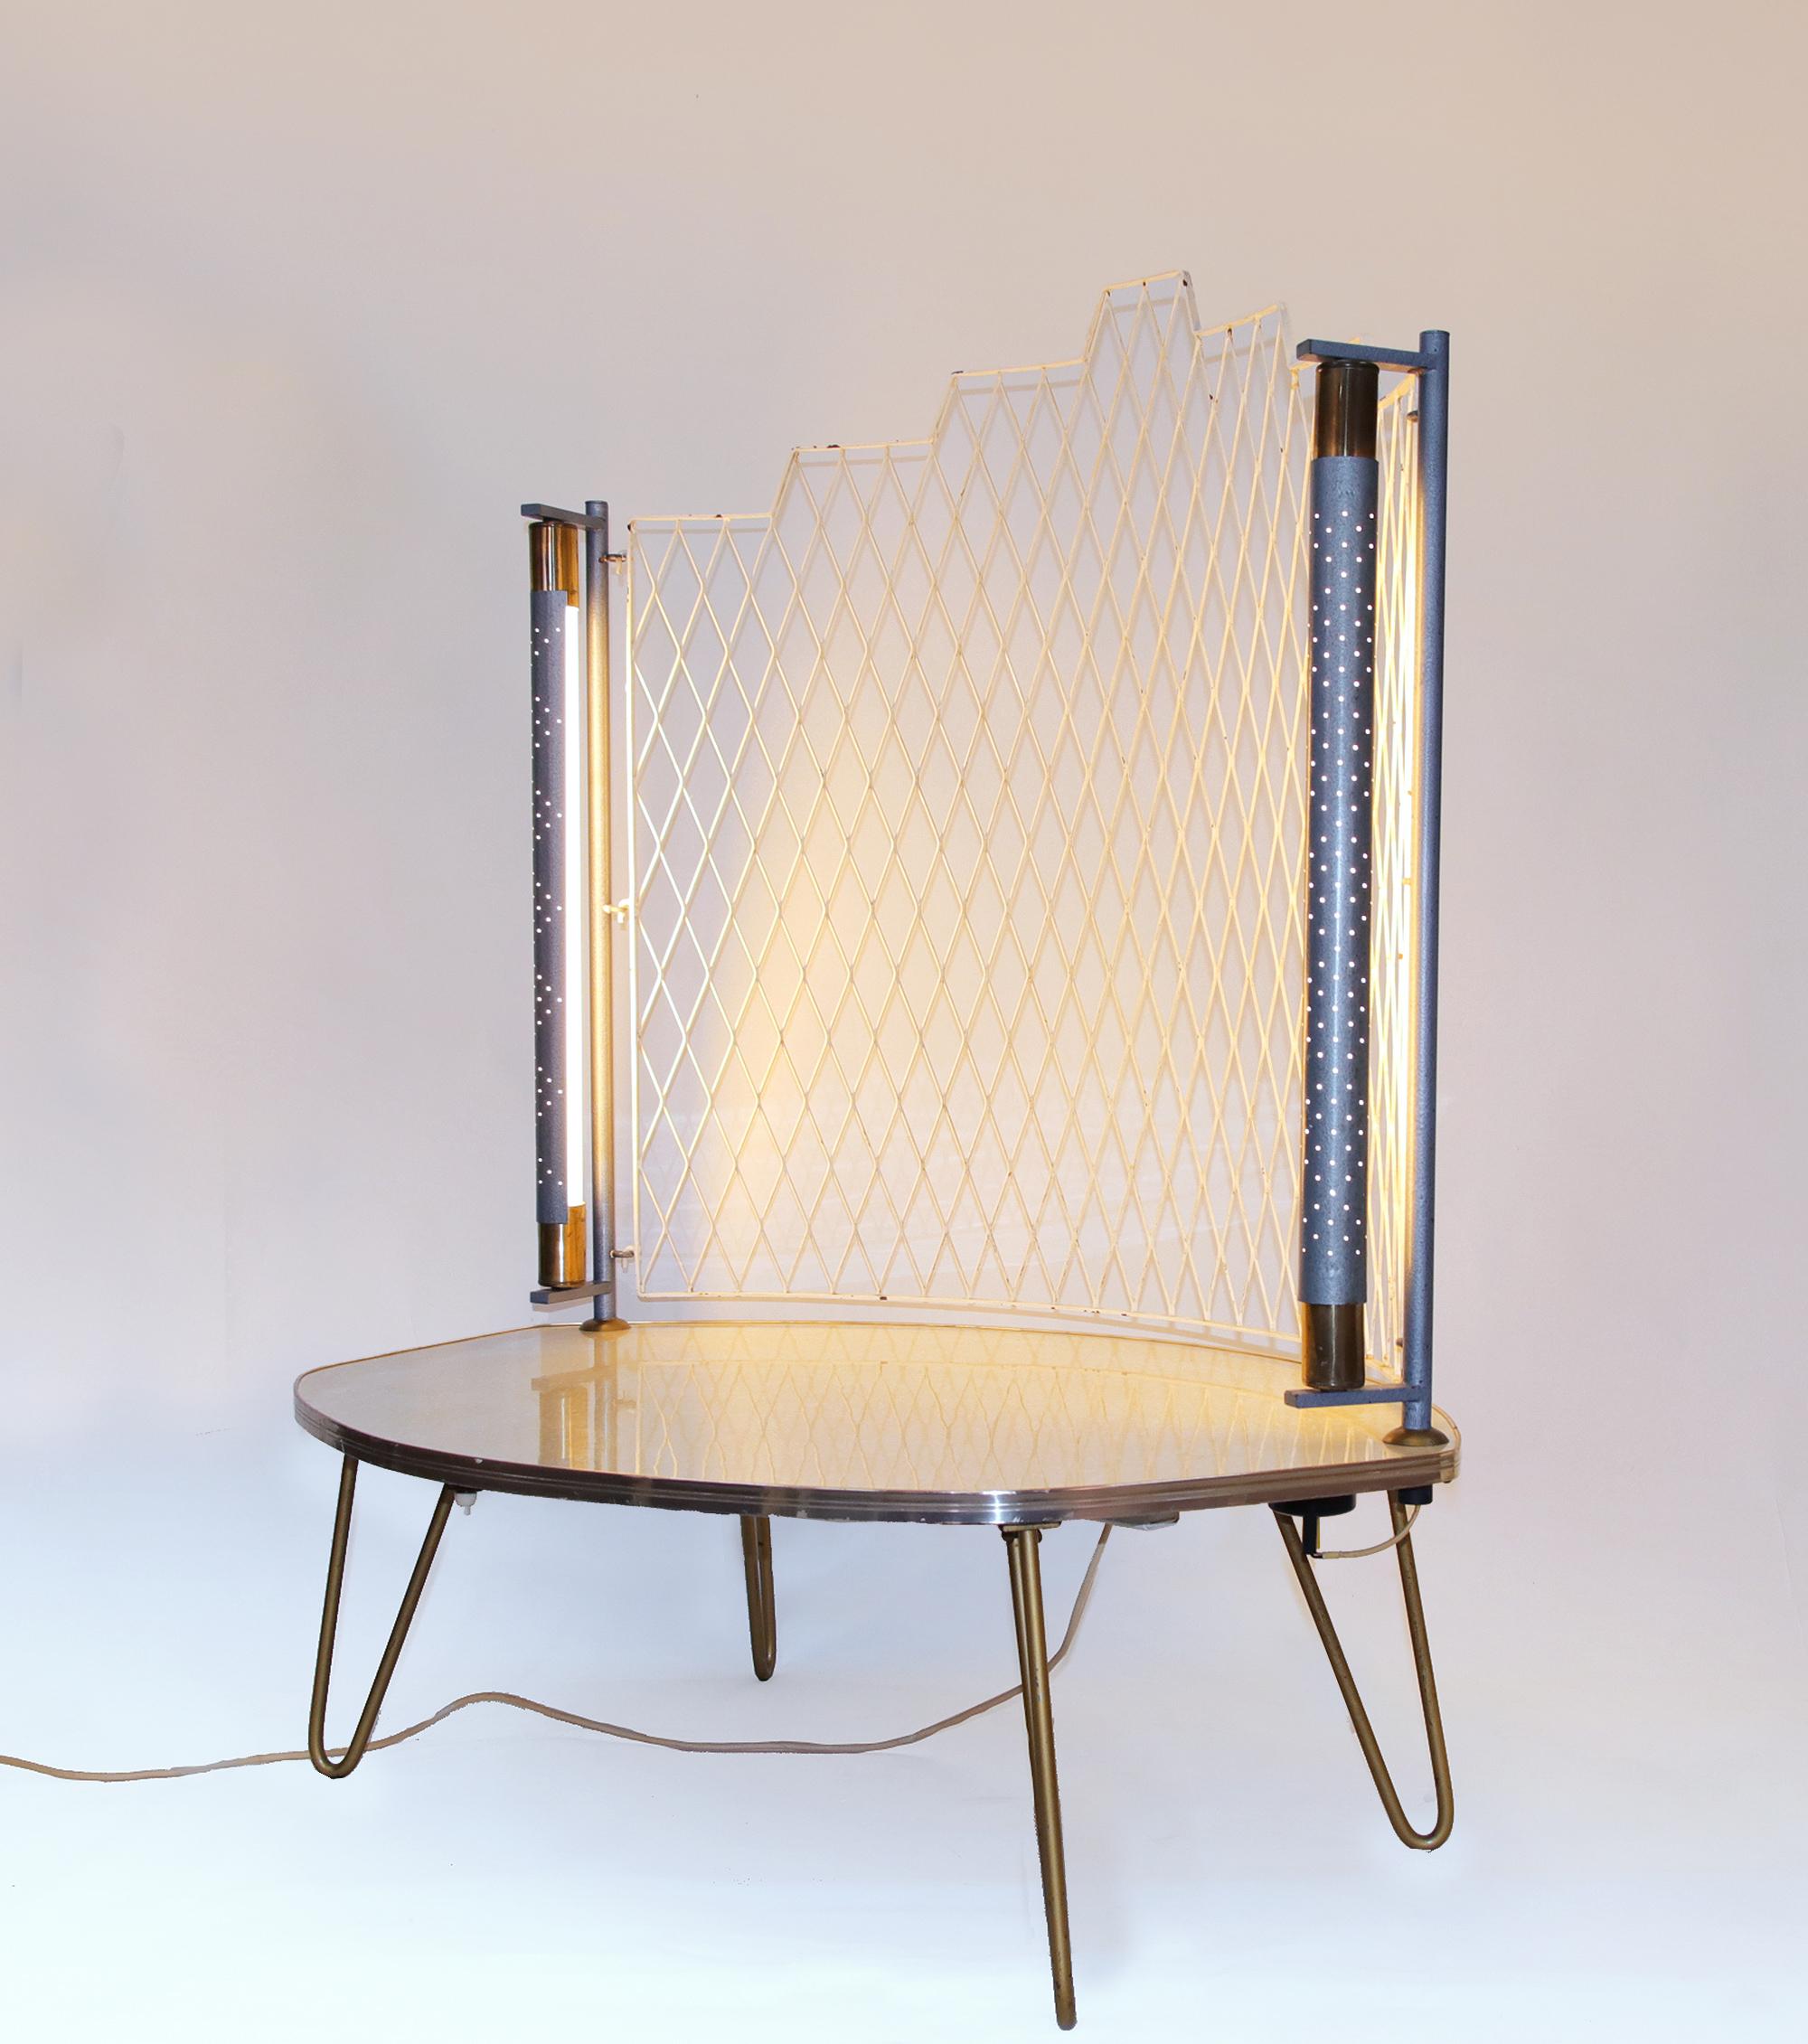 Amazing Mid-Century Modern asymmetric console or table used for a telephone, for plants or as a display.

The light reflects from the rotatable perforated shade of the fluorescent tubes shines through the dots.
The white honeycombed grid is